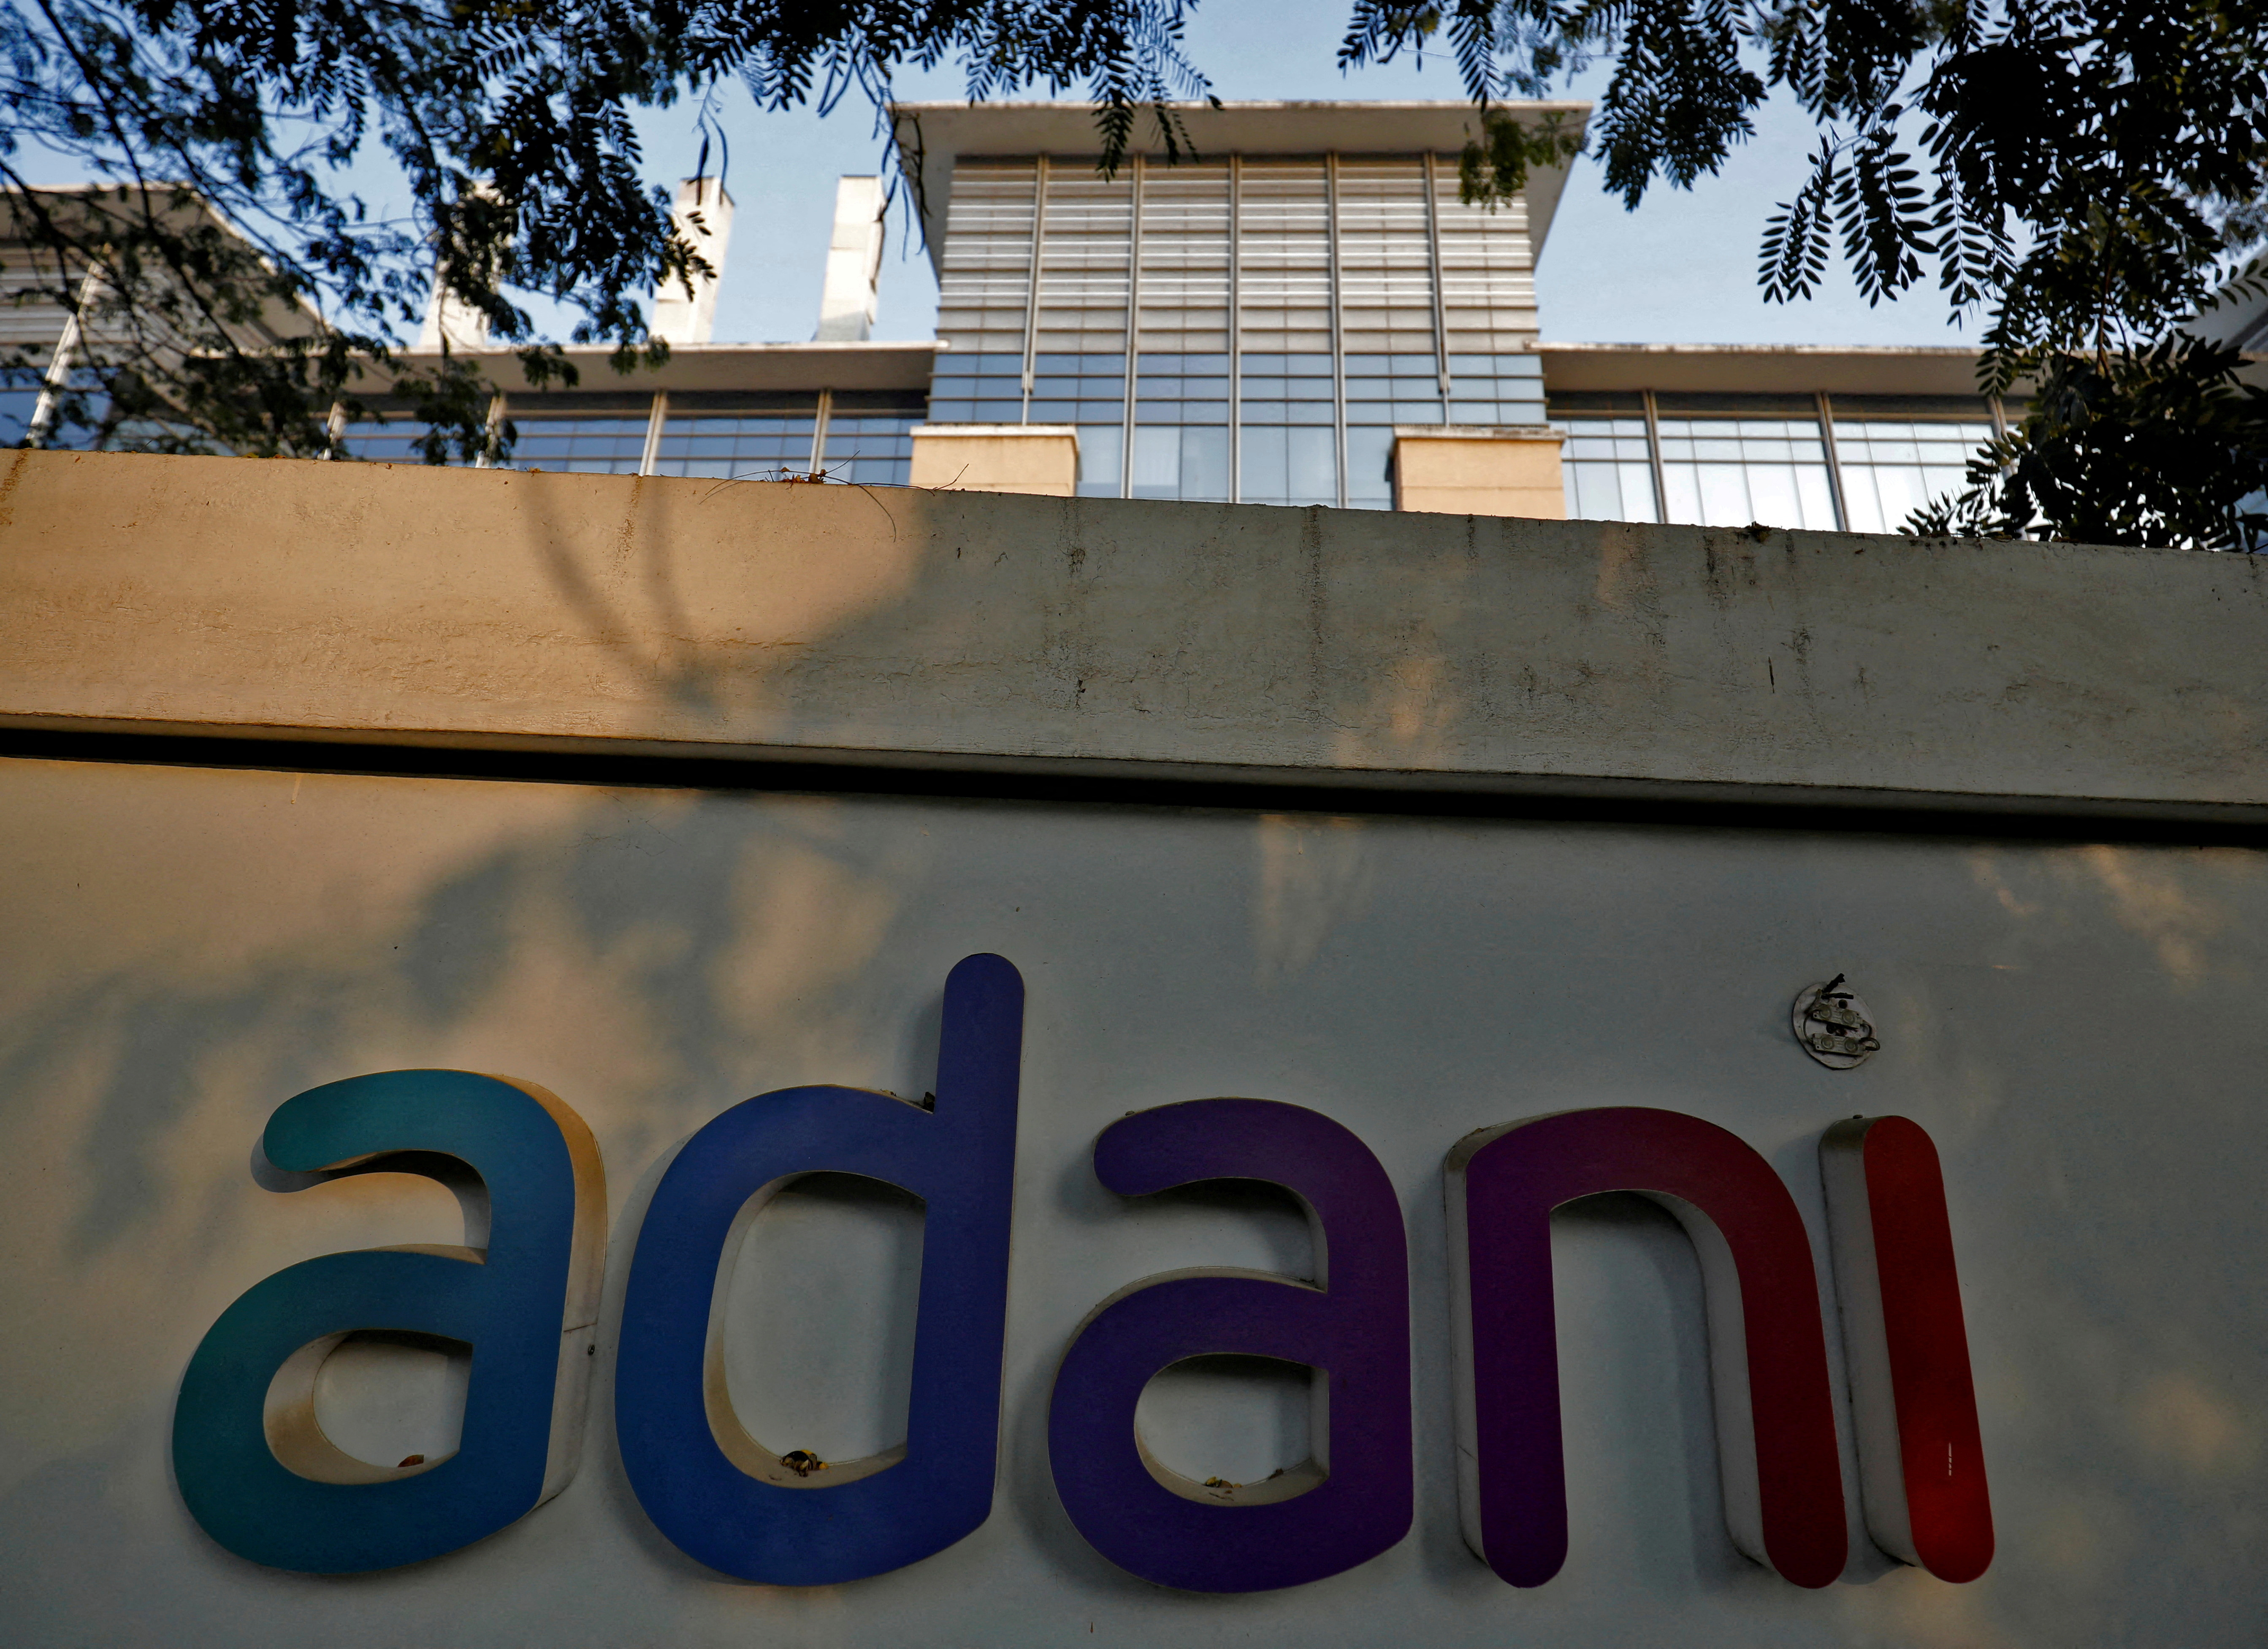 The logo of the Adani Group is seen on the wall of its realty office building on the outskirts of Ahmedabad